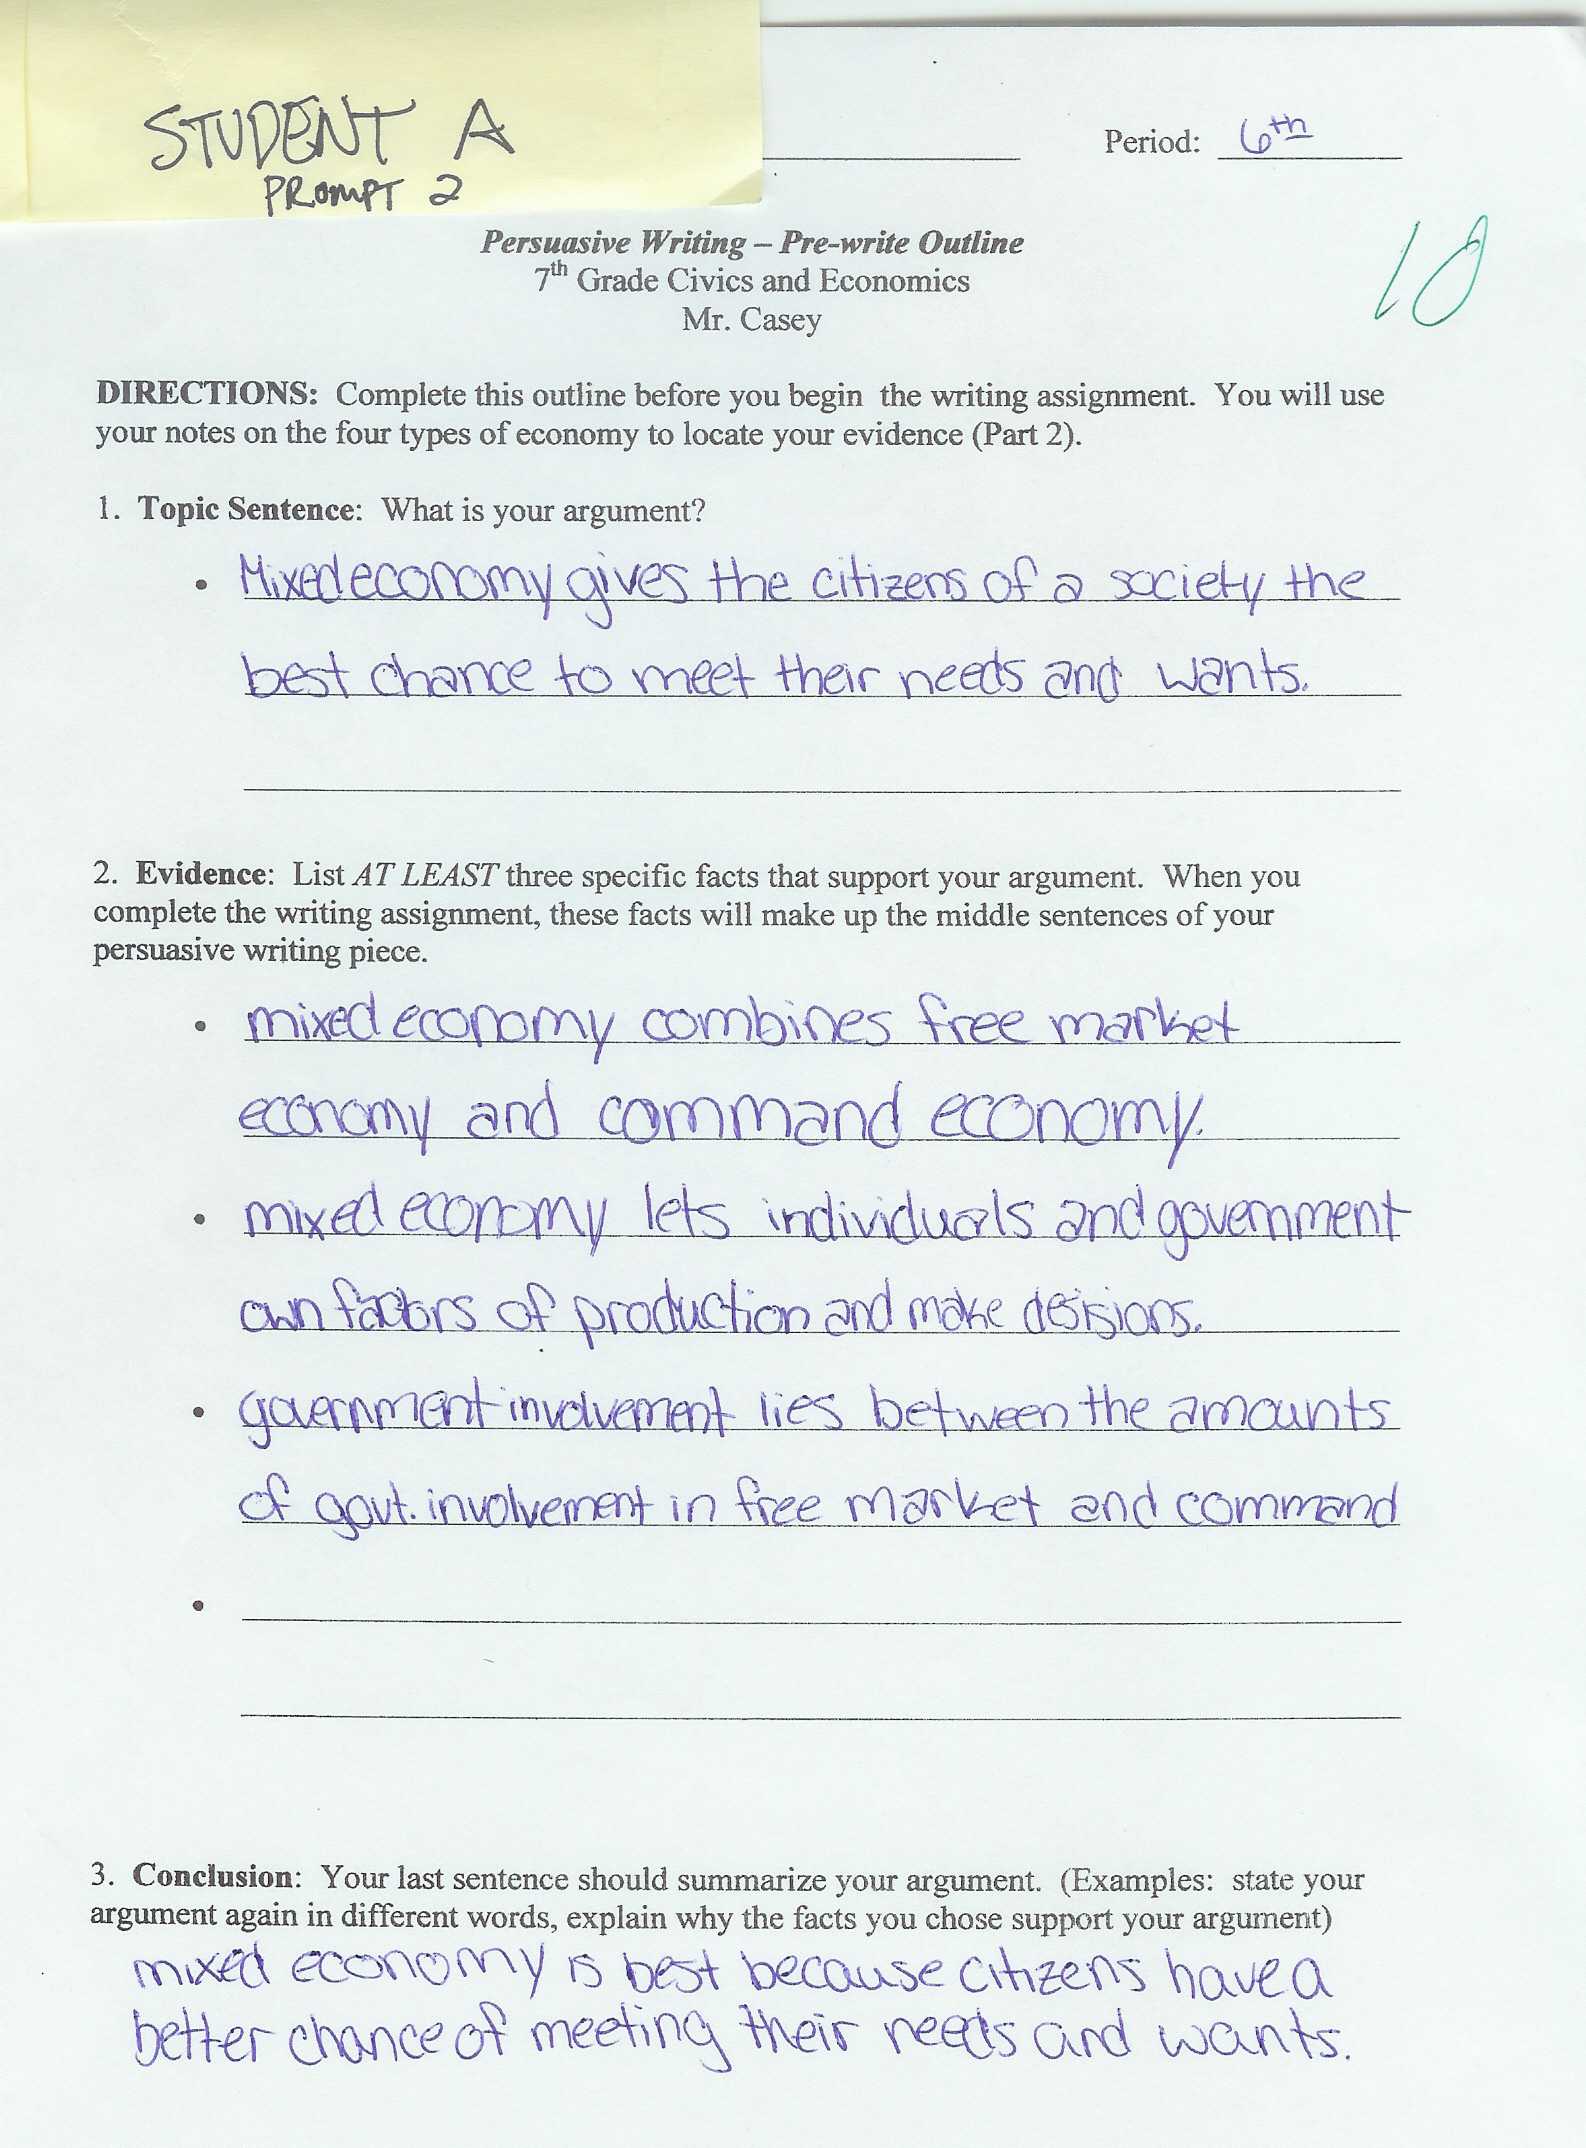 Guided Reading Activity 2 1 Economic Systems Worksheet Answers or How to Write A Style Analysis Essay